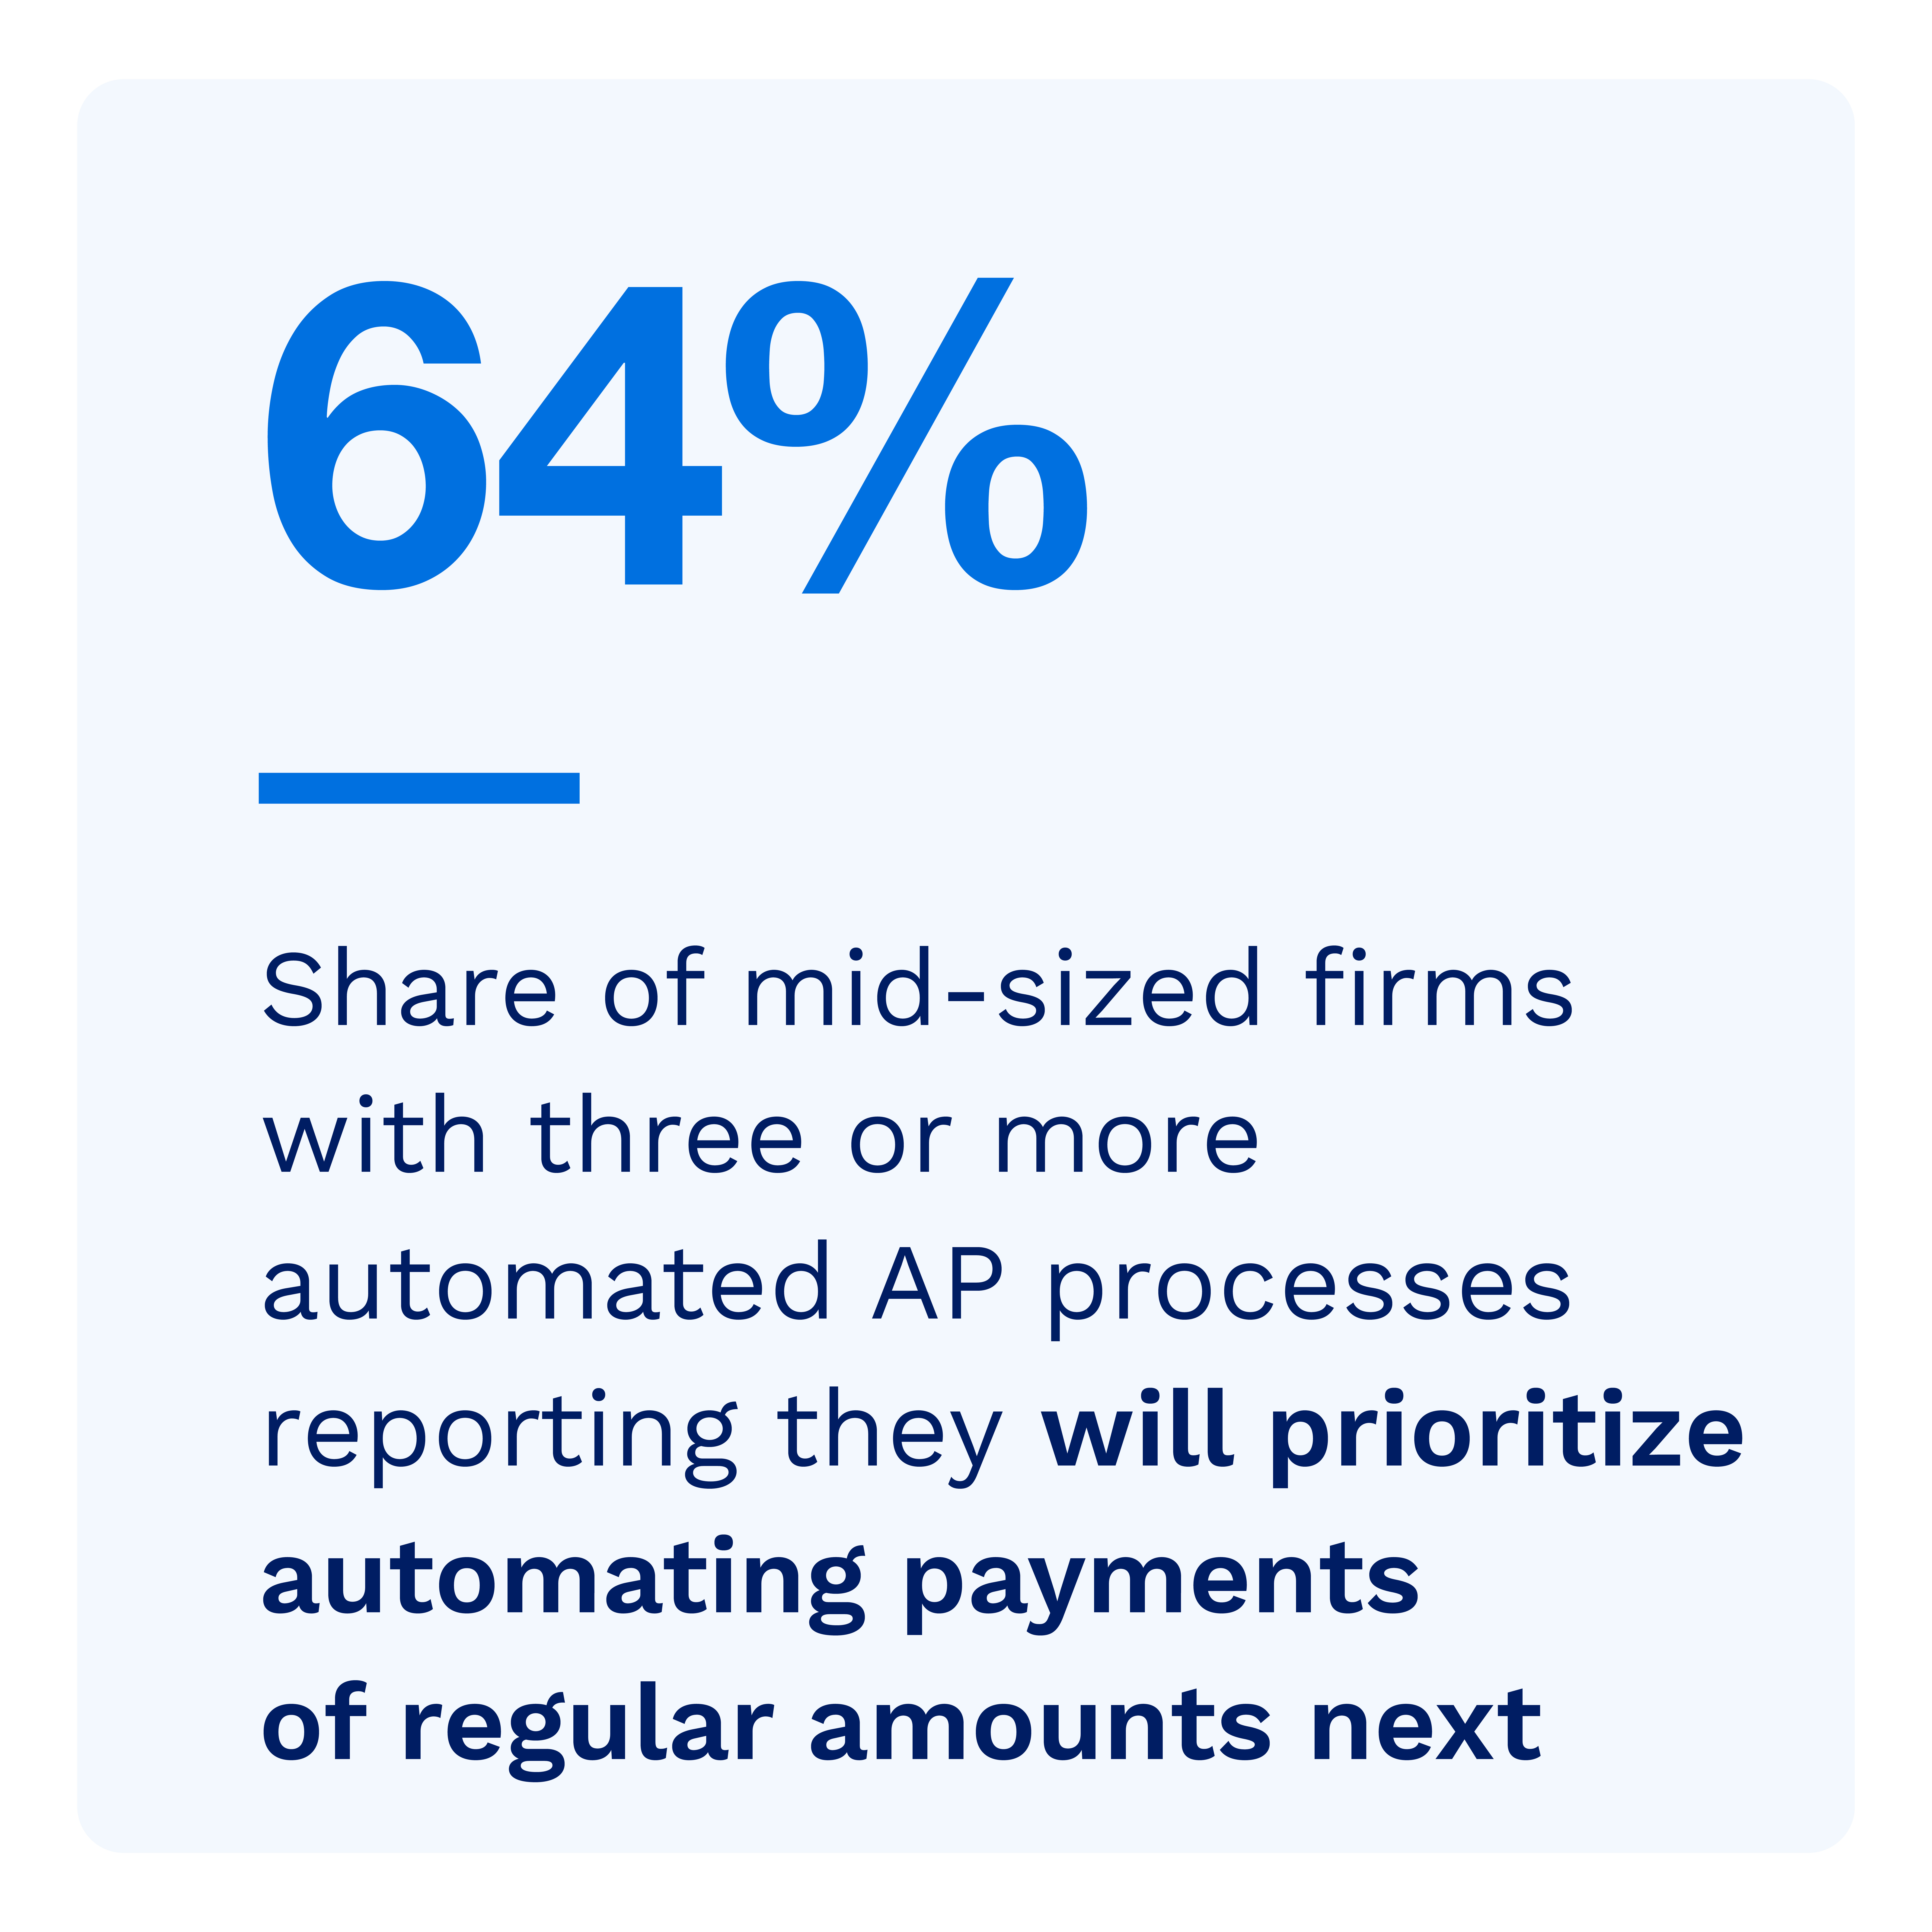 64%: Share of mid-sized firms with three or more automated AP processes reporting they will prioritize automating payments of regular amounts next